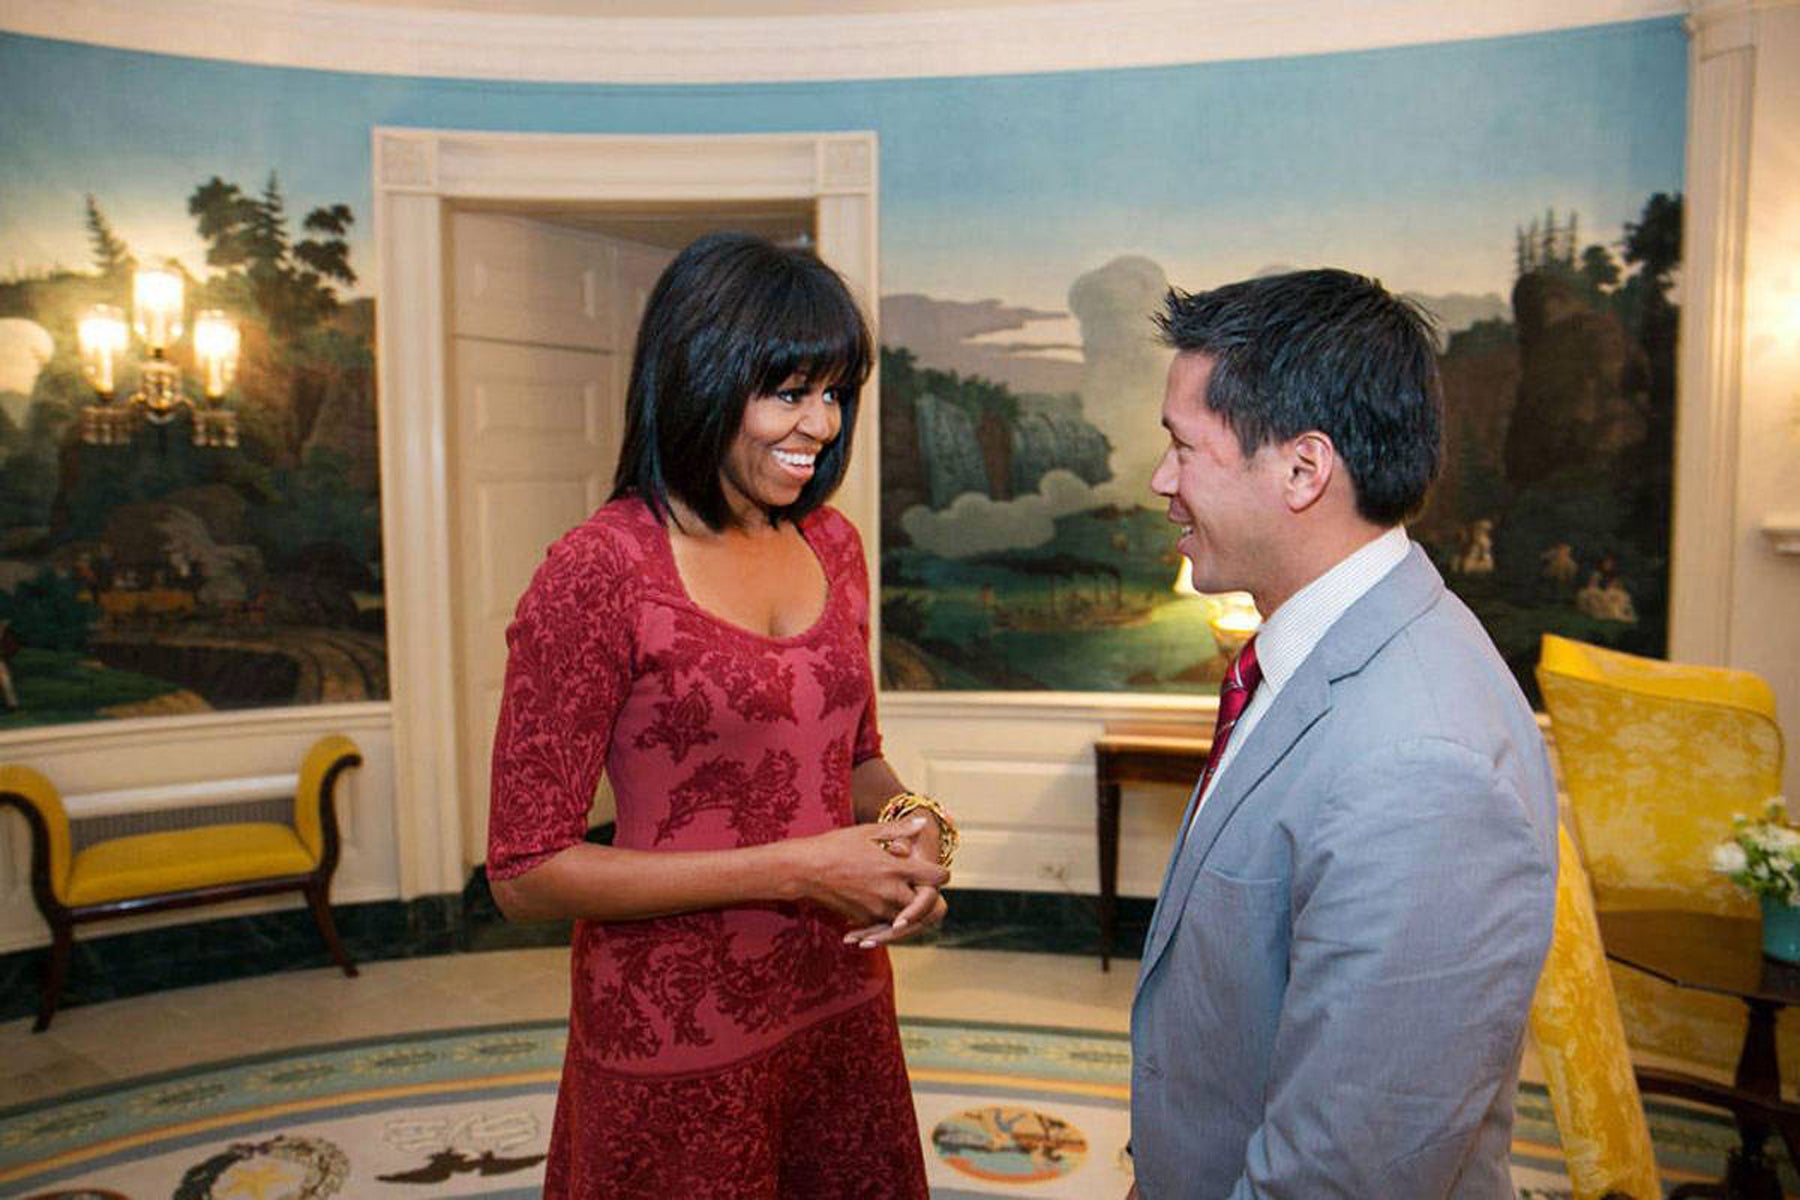 Do You Love Michelle Obama's New Bangs?